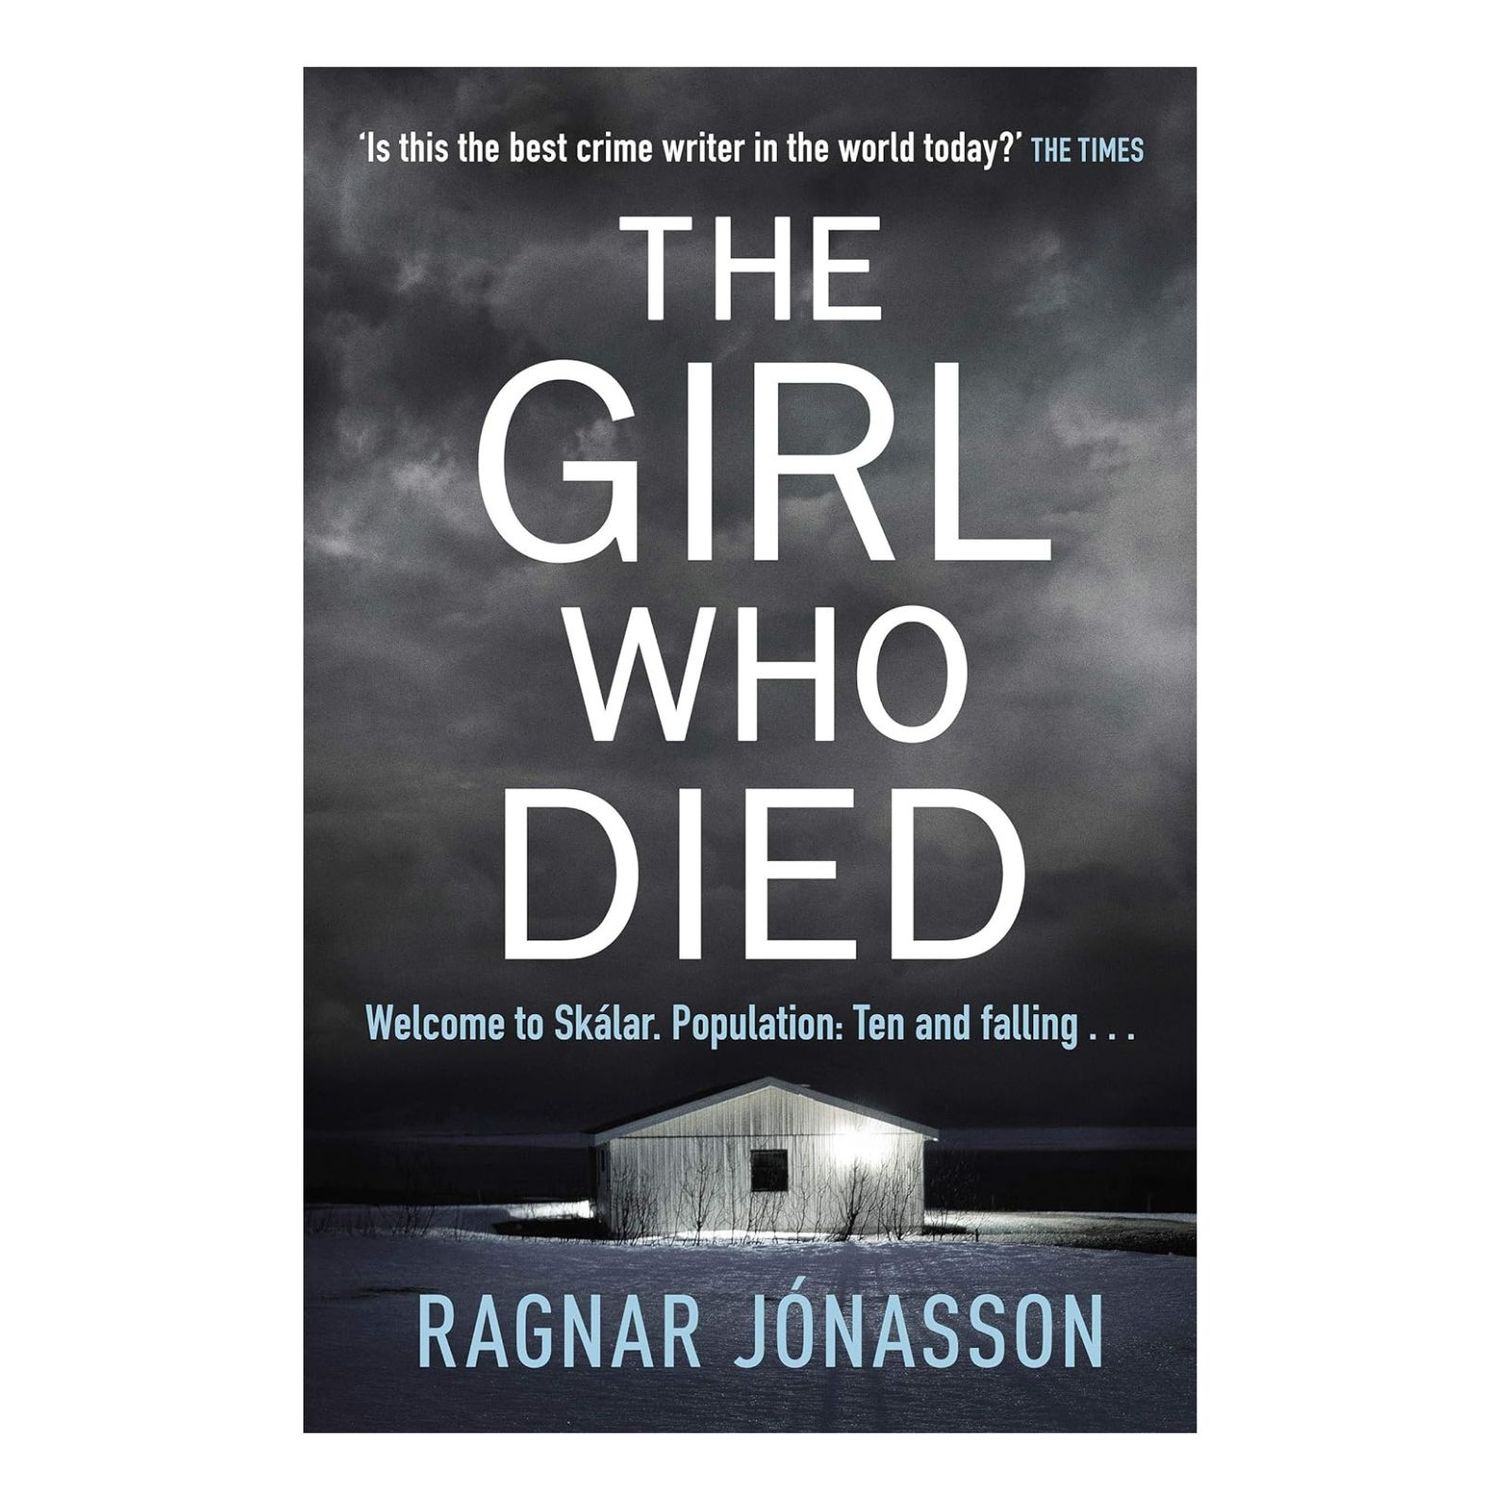 The Girl Who Died by Ragnar Jonasson